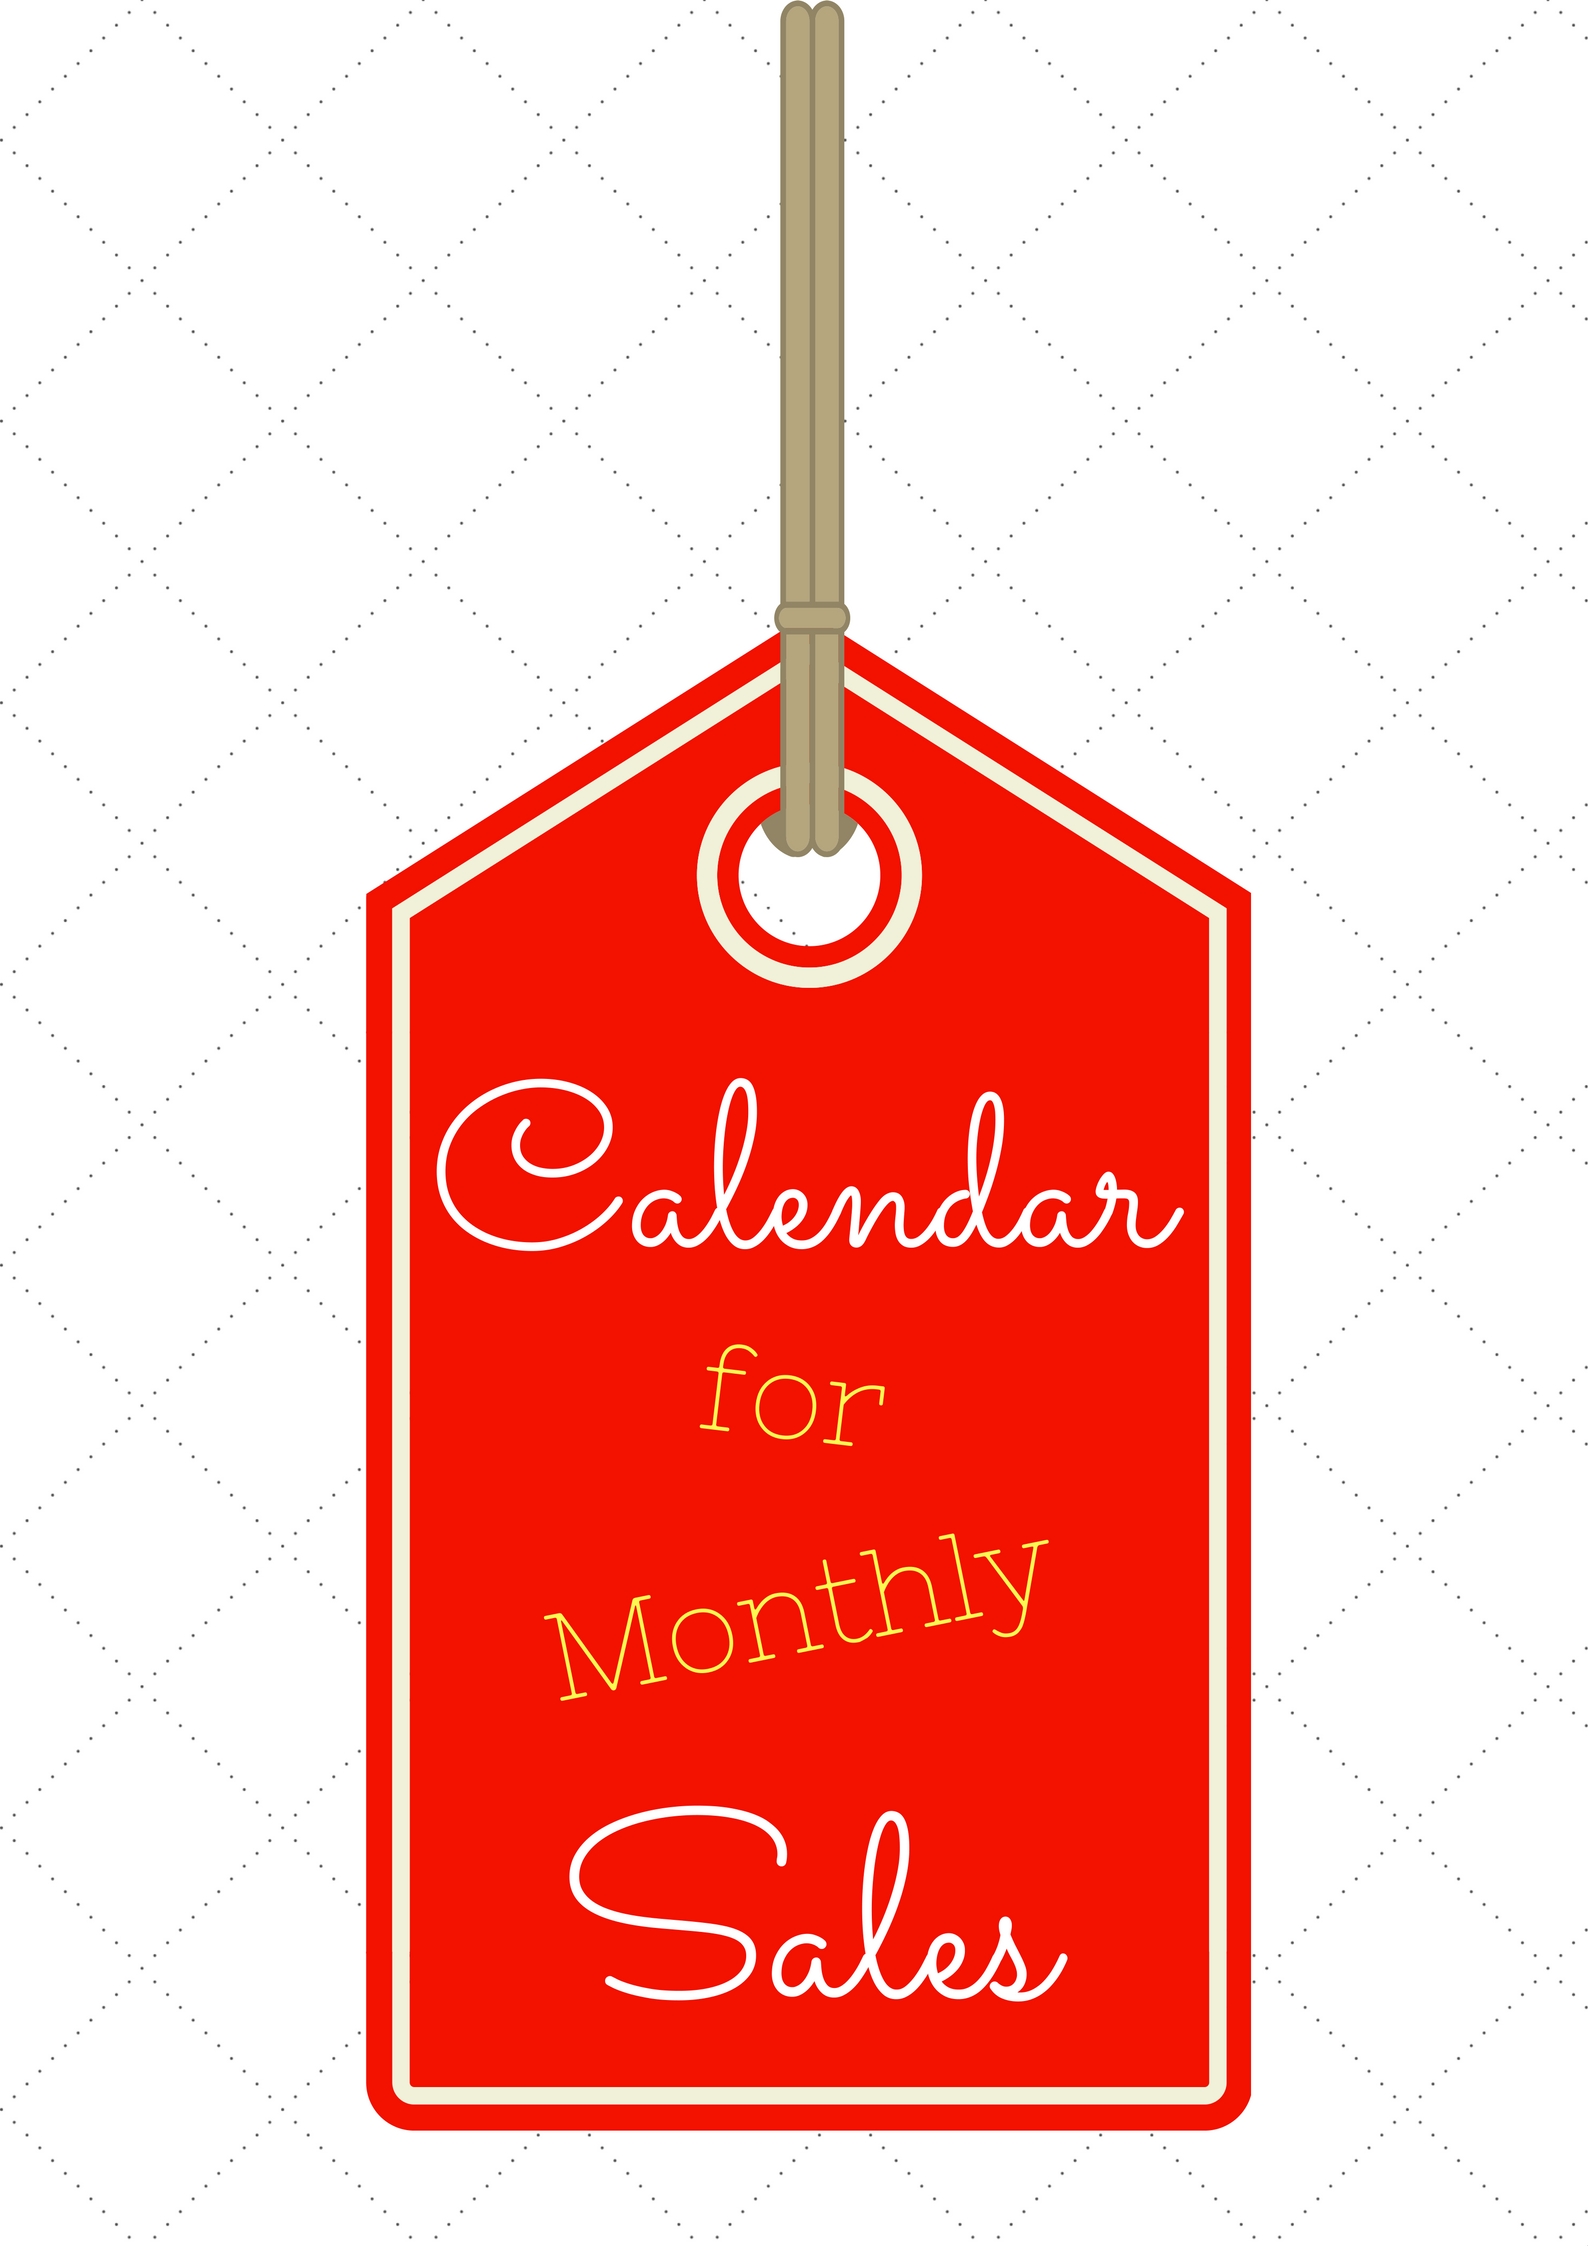 Calendar for monthly sales